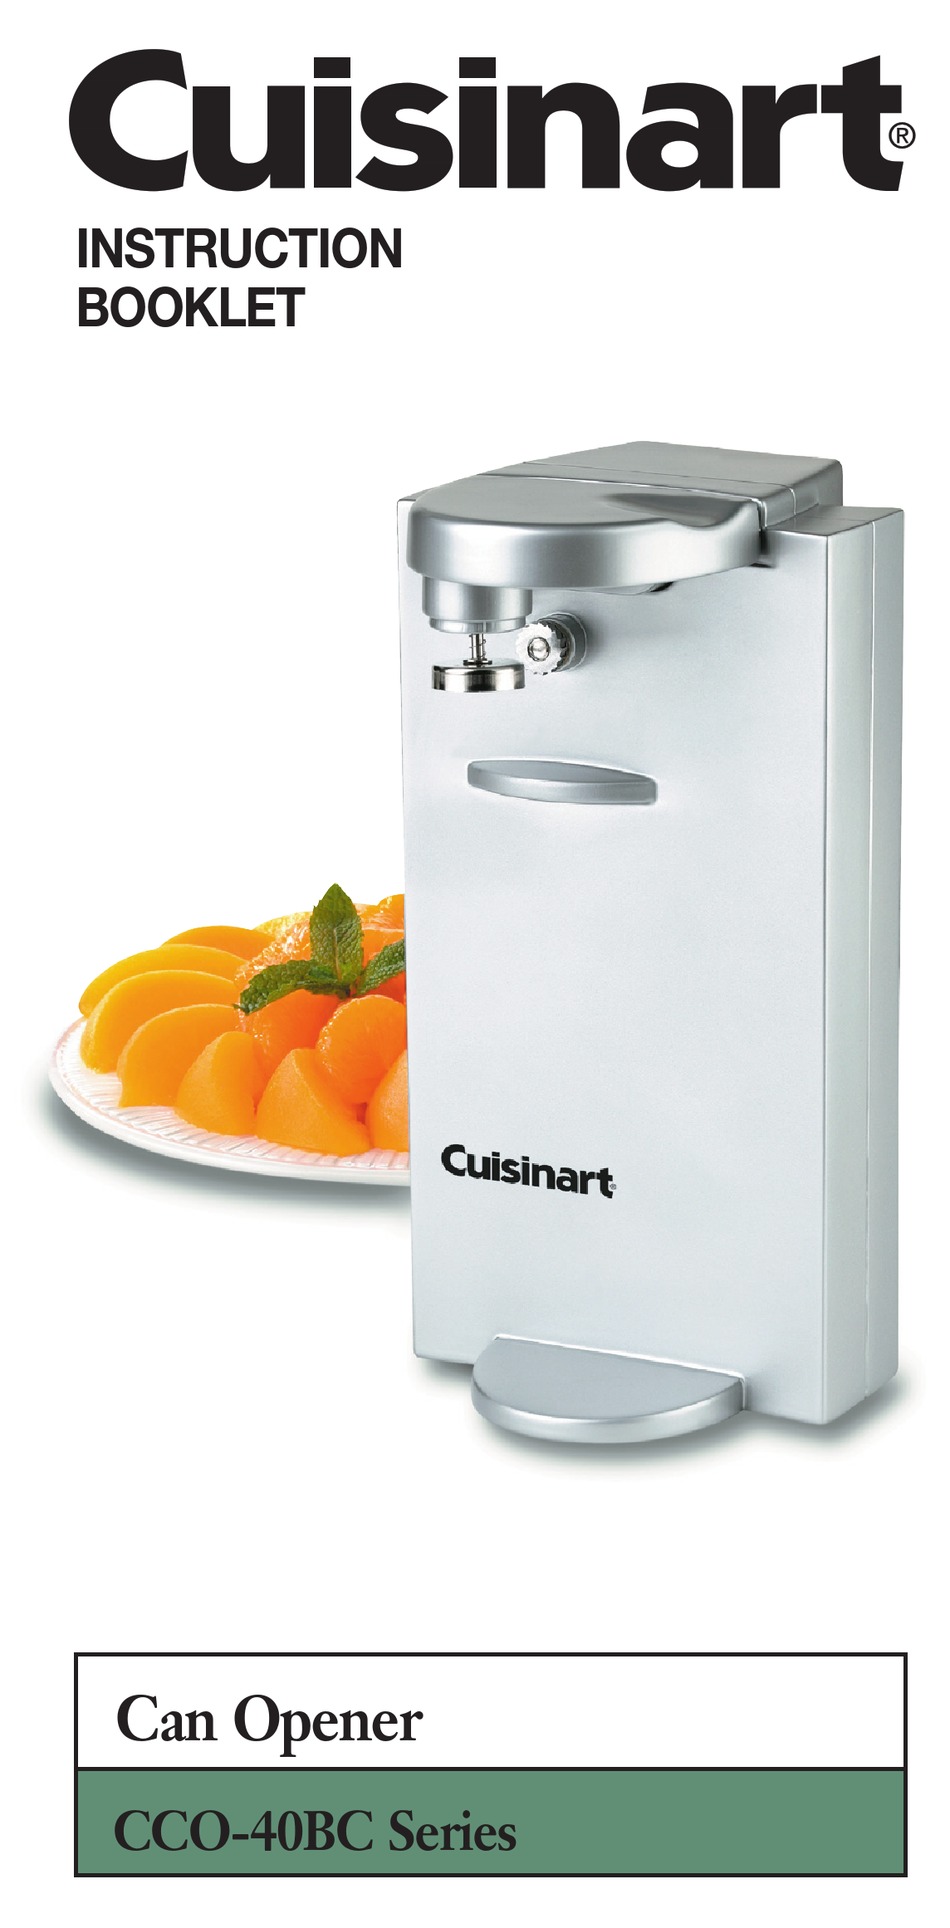 CUISINART CCO-40BC SERIES INSTRUCTION BOOKLET Pdf Download